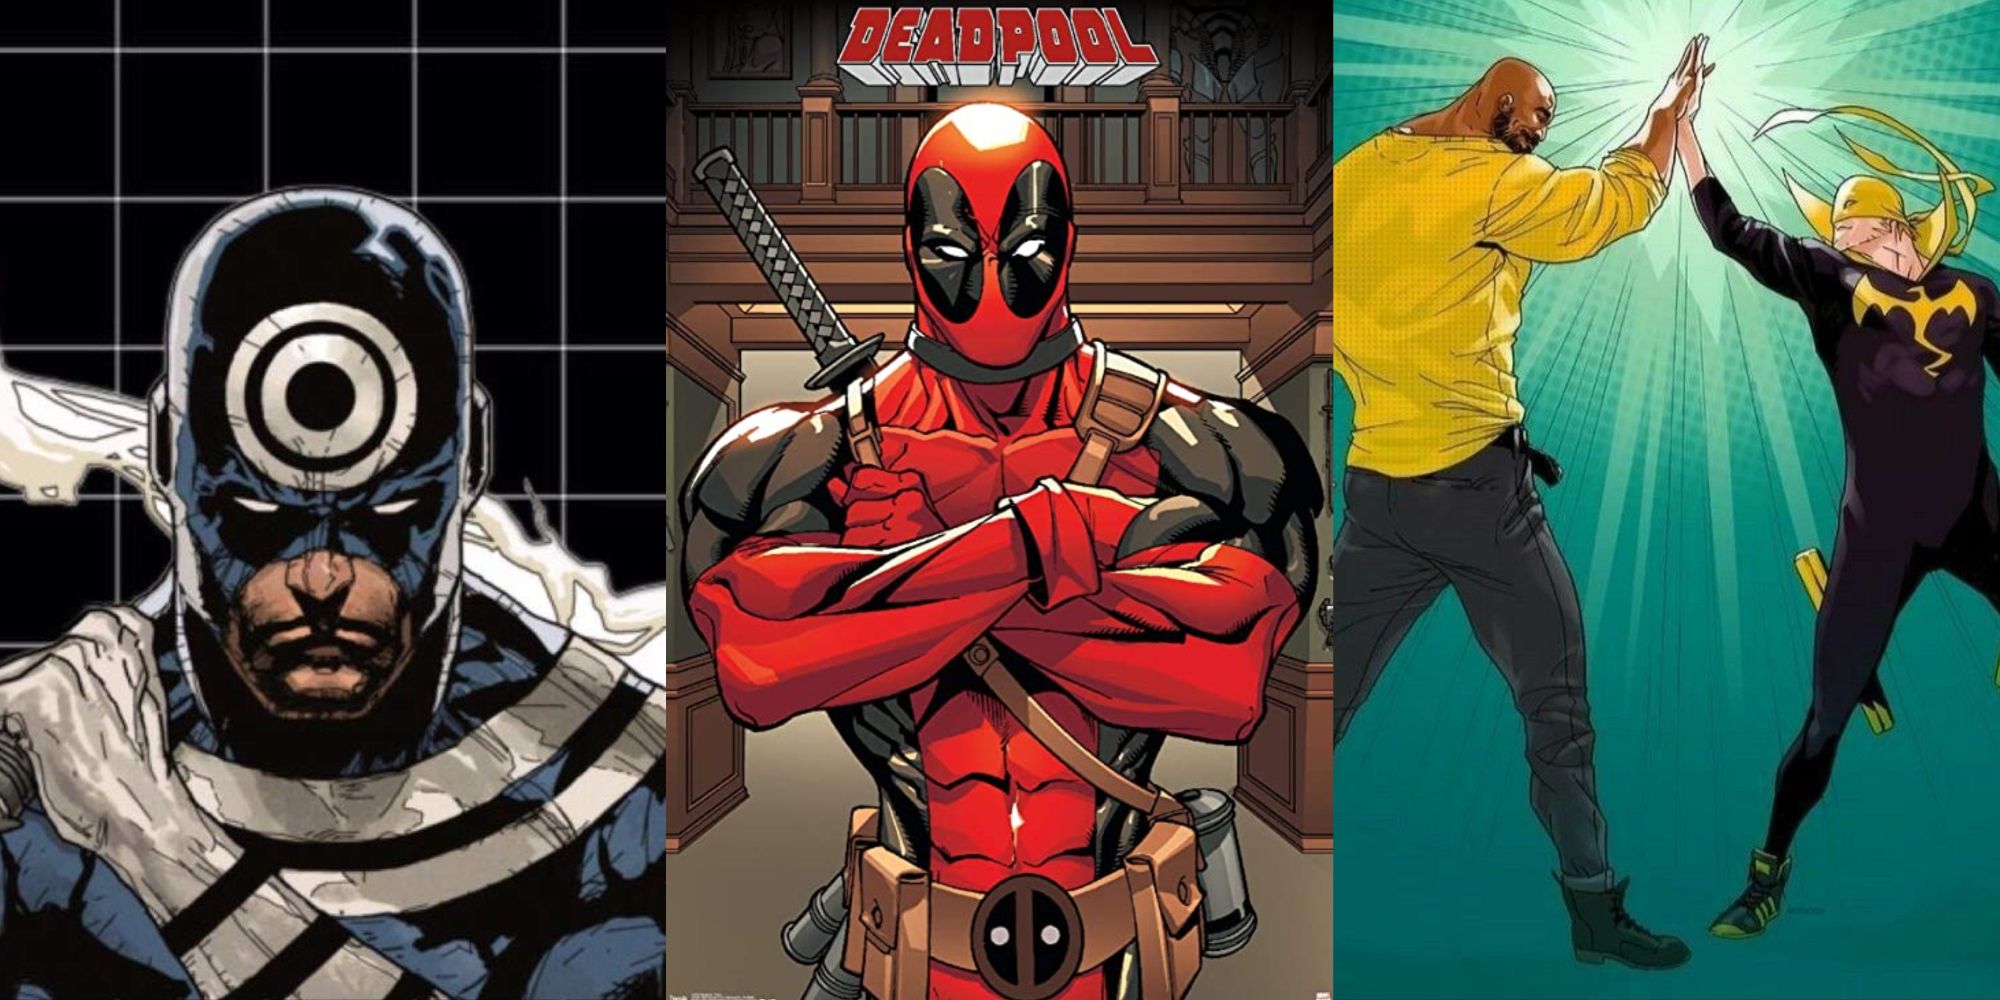 A split image of Bullseye, Deadpool, and Luke Cage and Iron Fist in Marvel Comics